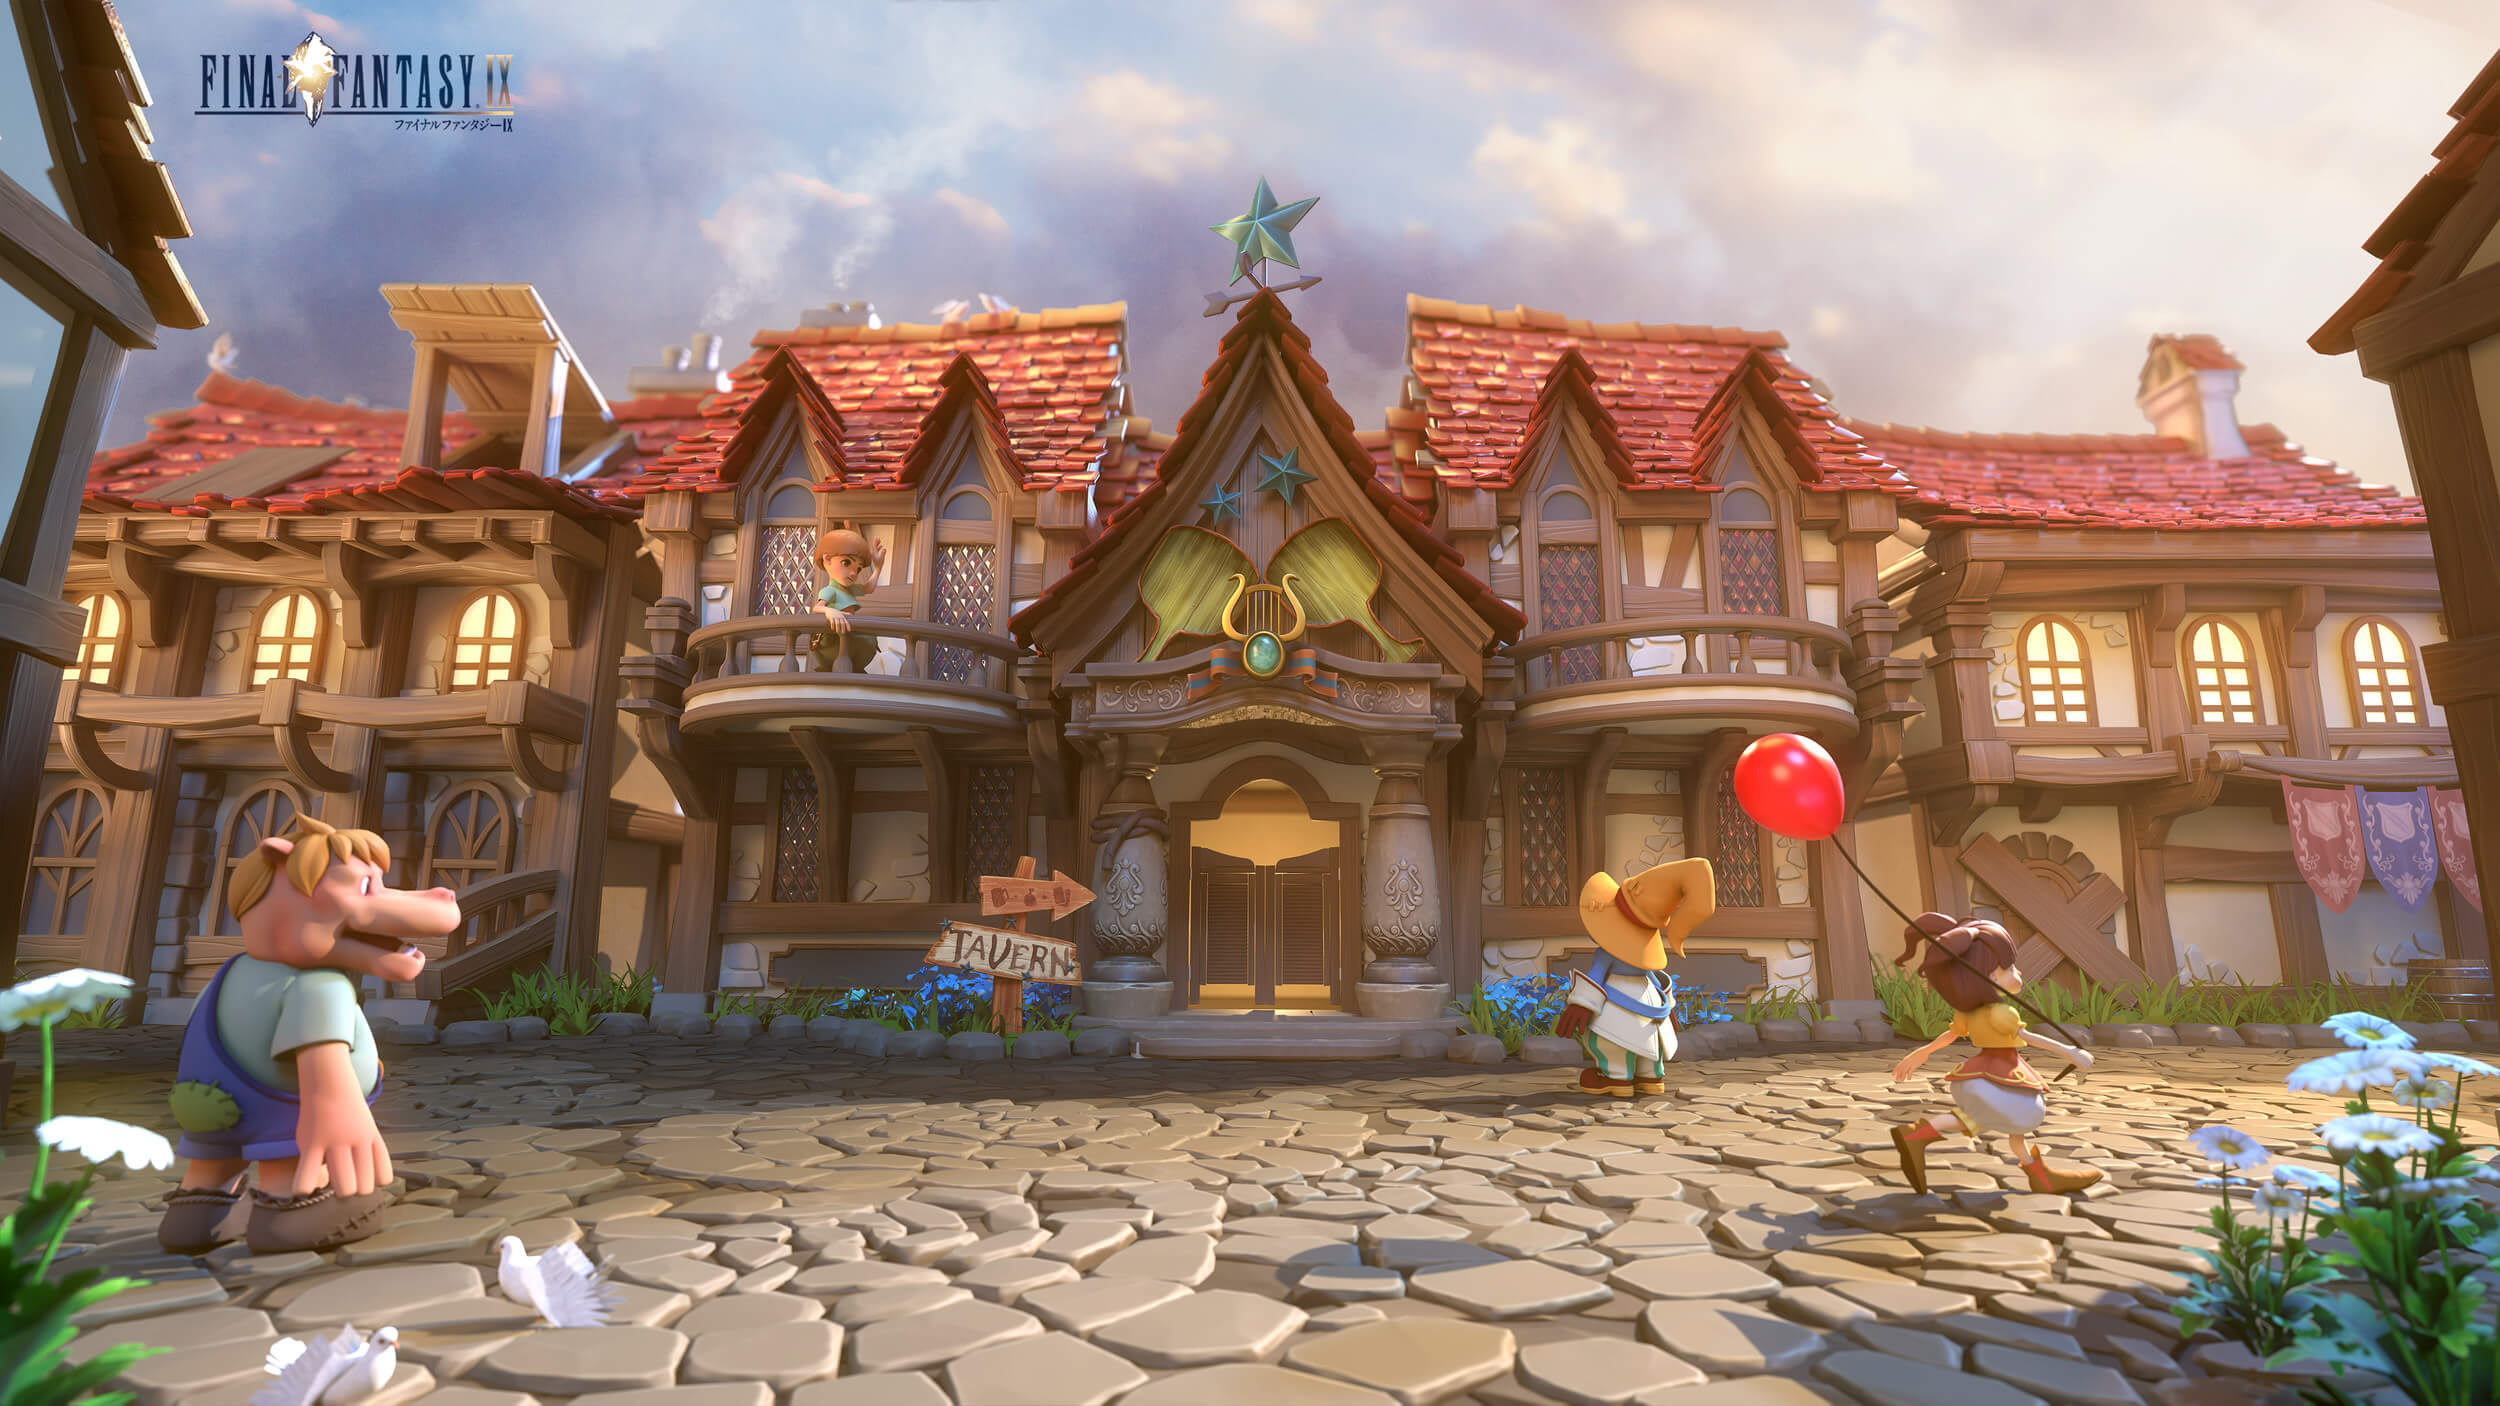 A Final Fantasy 9 Remake Could Look This Amazing [Video] - eTeknix